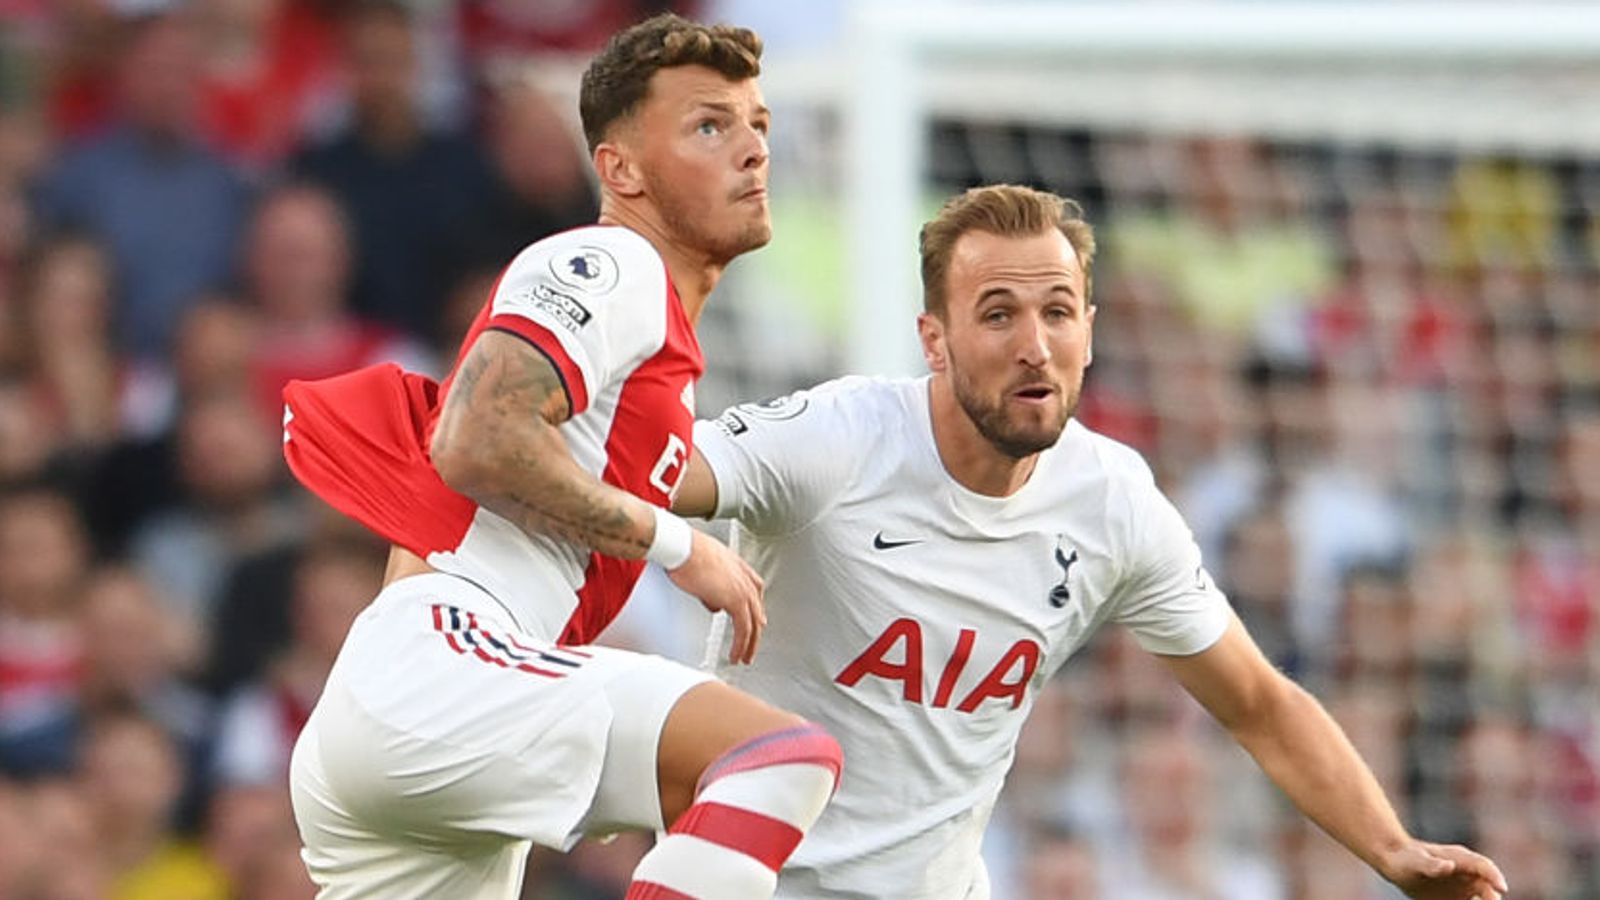 Tottenham vs Arsenal North London derby postponed after Gunners request, leaving Spurs extremely surprised Football News Sky Sports